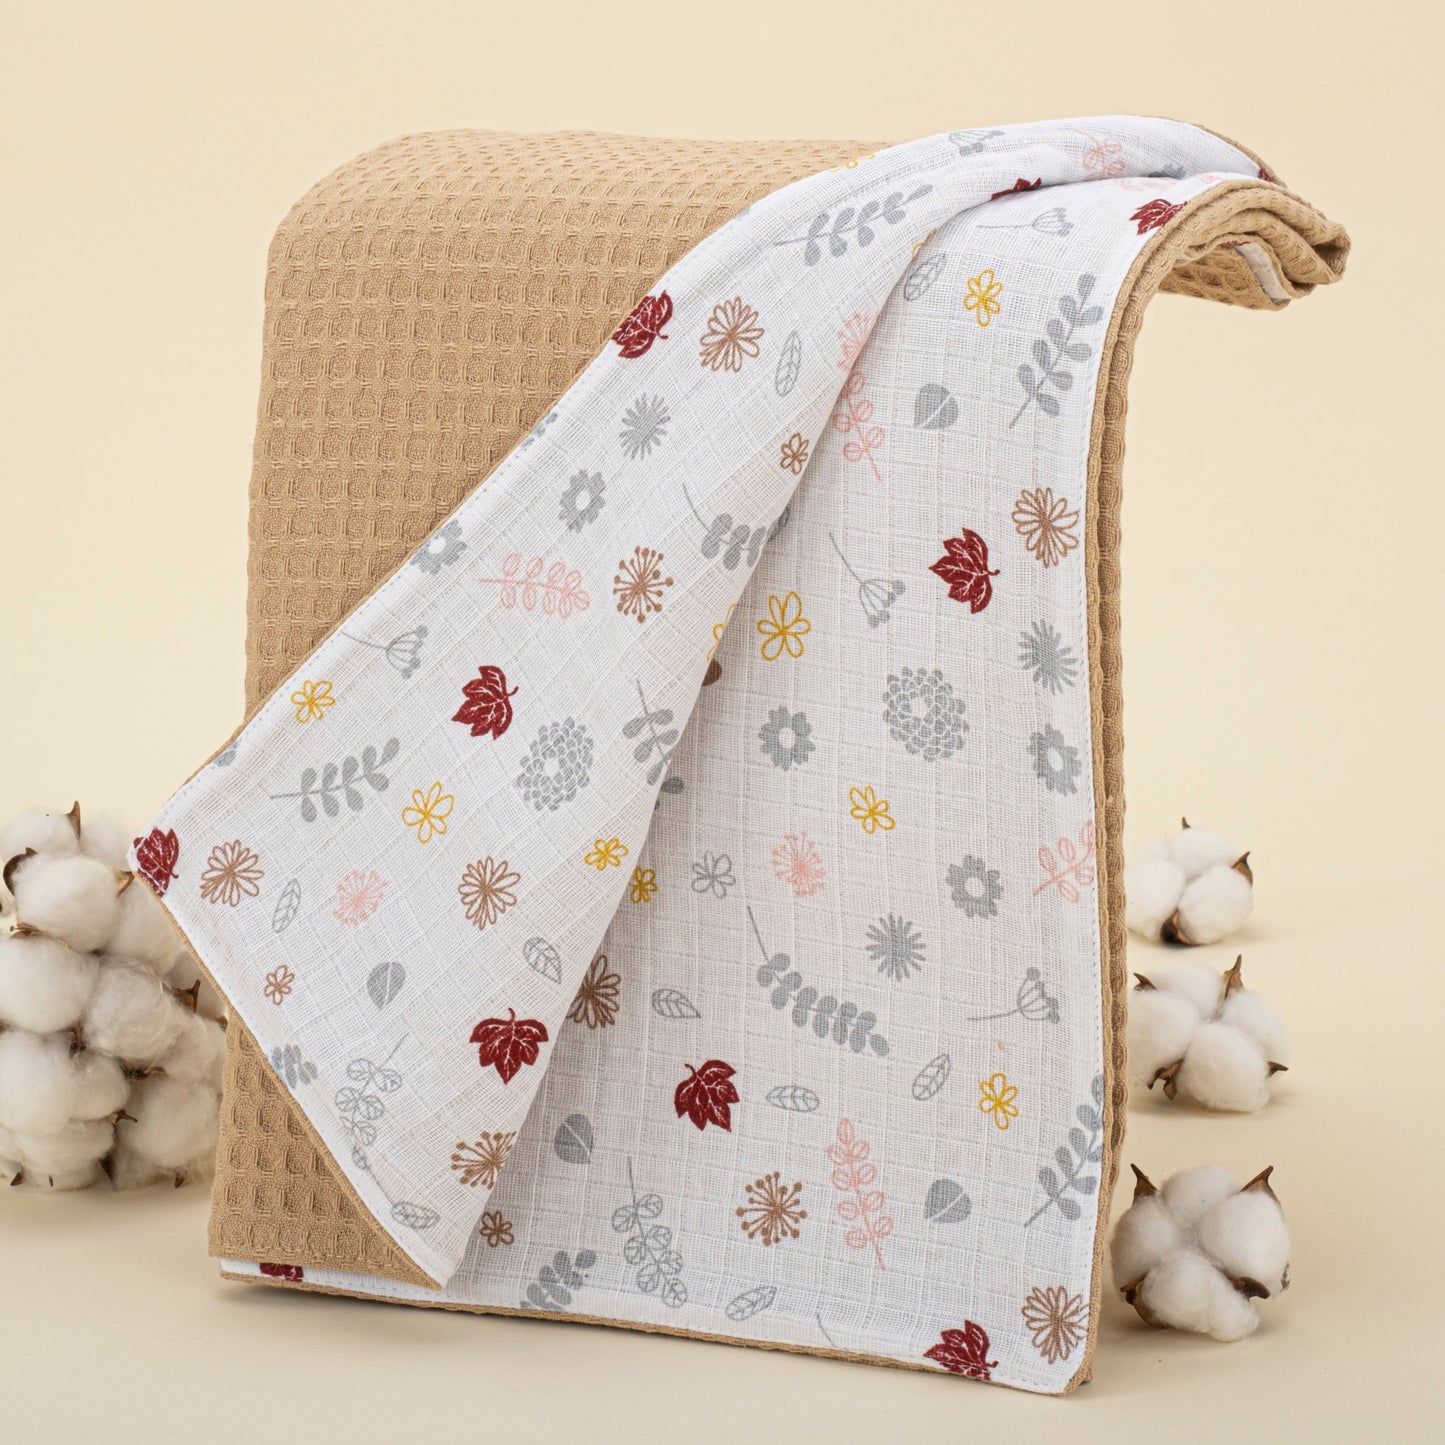 Pique Blanket - Double Side - Honeycomb - Spring Patterns